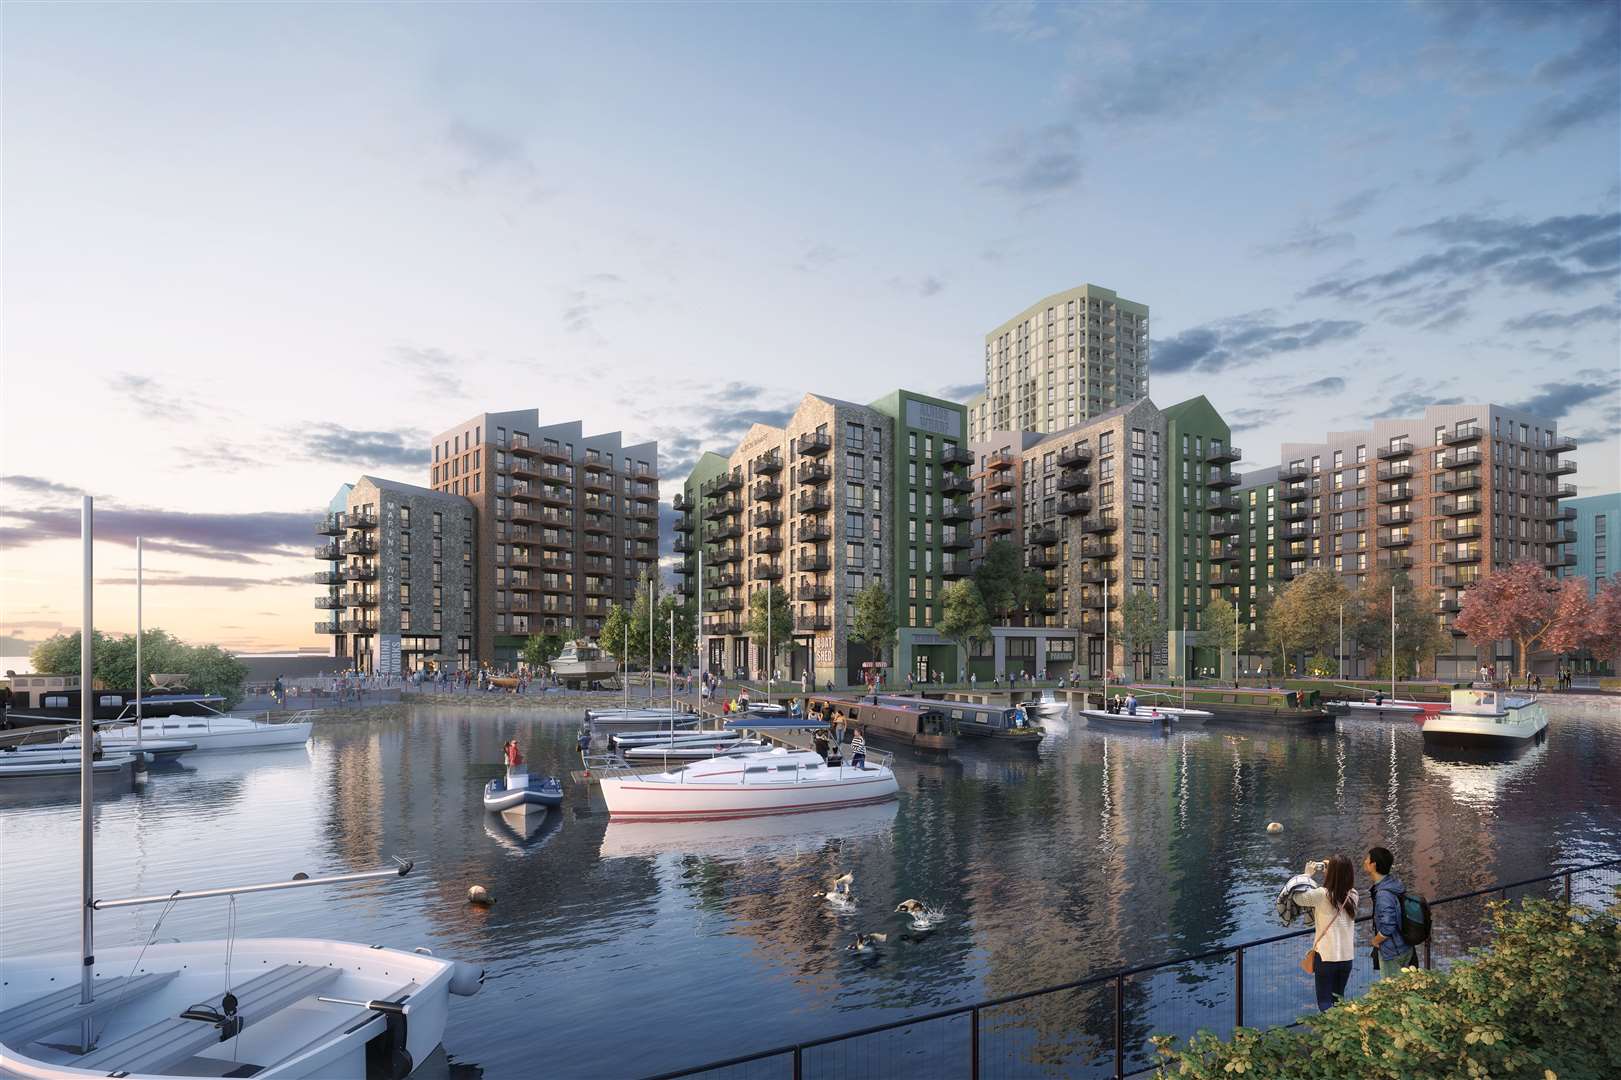 The Albion Waterside development in Gravesend has been approved by Gravesham council. Picture: Joseph Homes